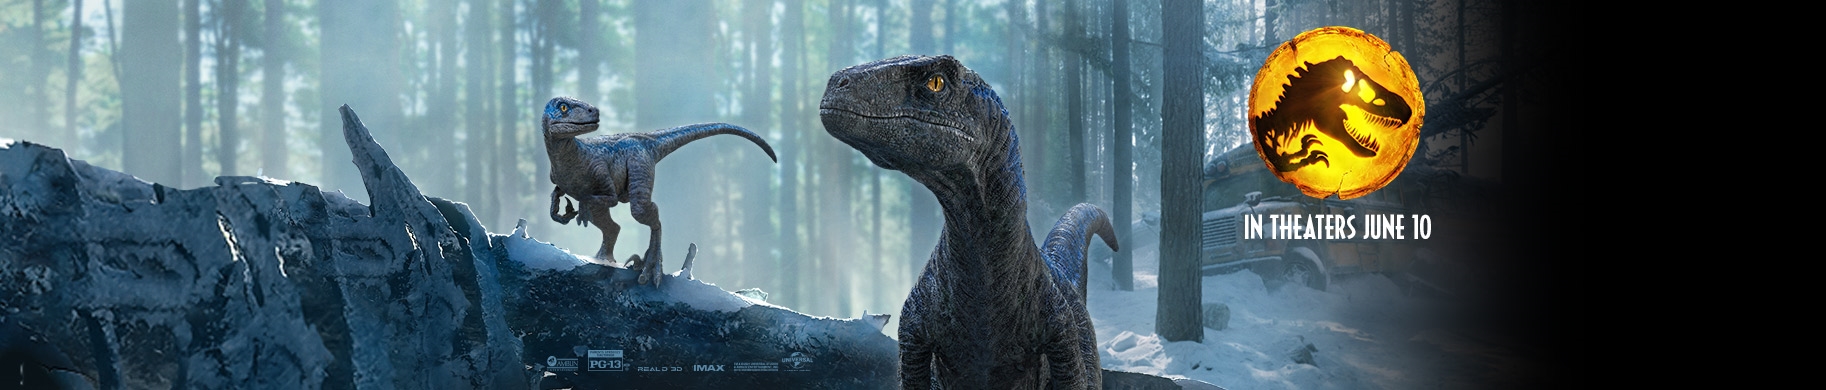 New Trailer and Tickets Available for ‘Jurassic World: Dominion’!